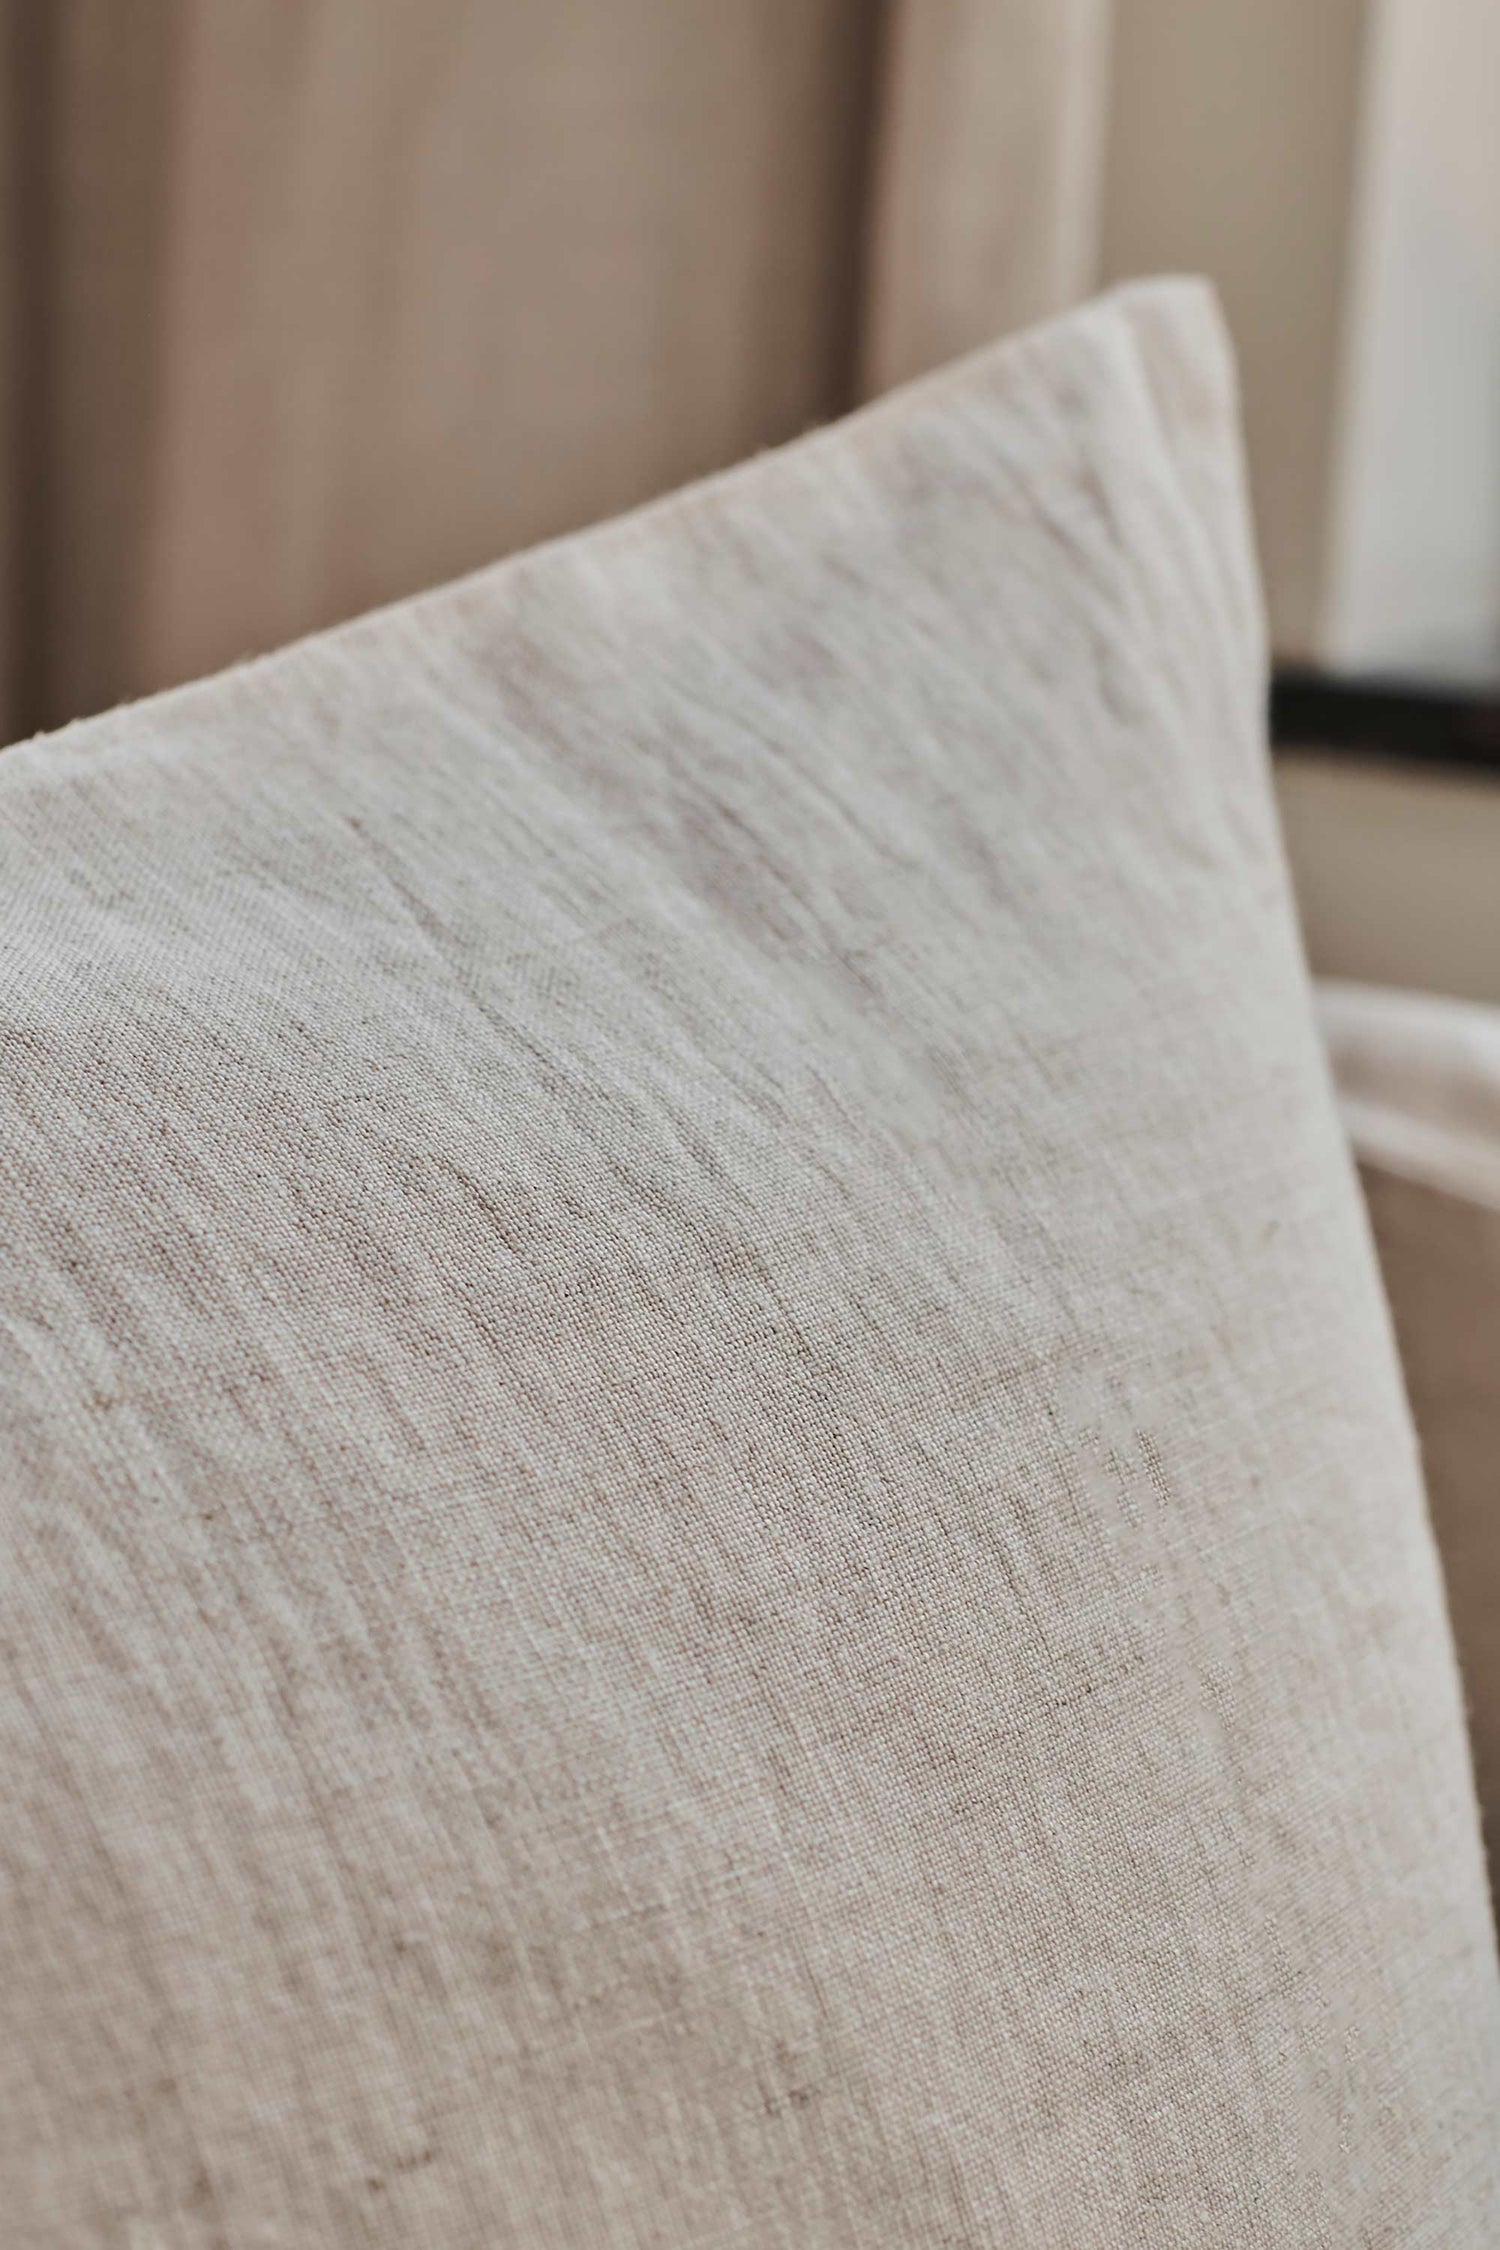 Close-up details of the Natural Linen Cushion by Timeless Linen.